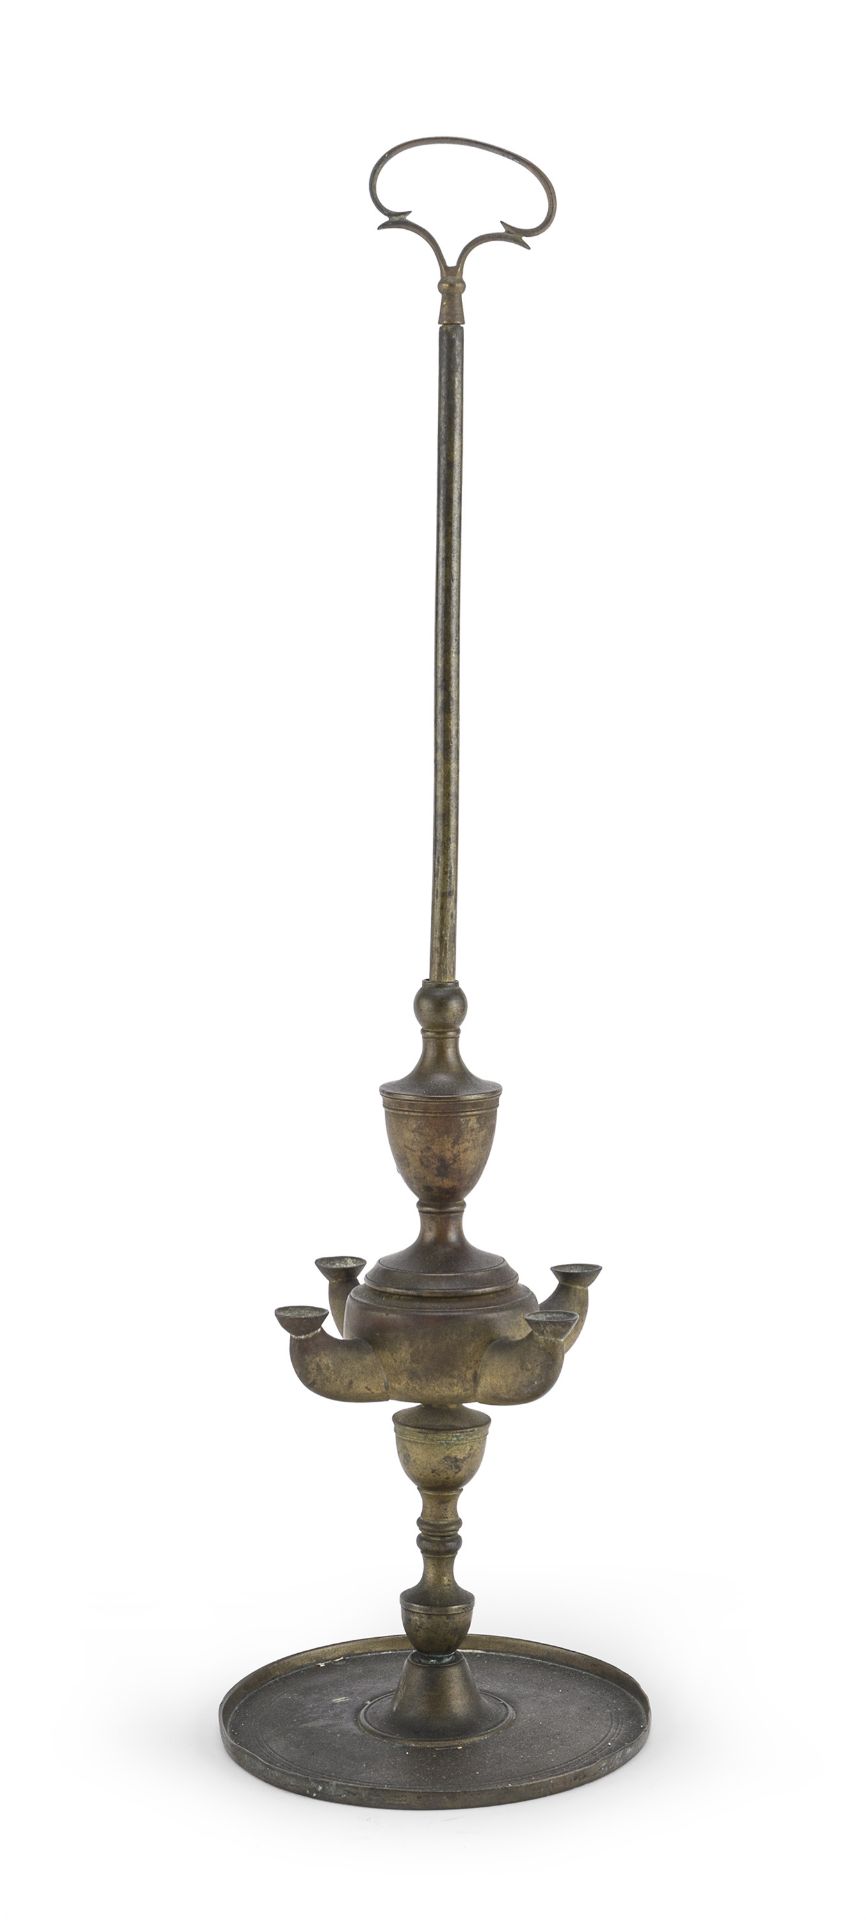 GILDED METAL OIL LAMP LATE 18TH CENTURY